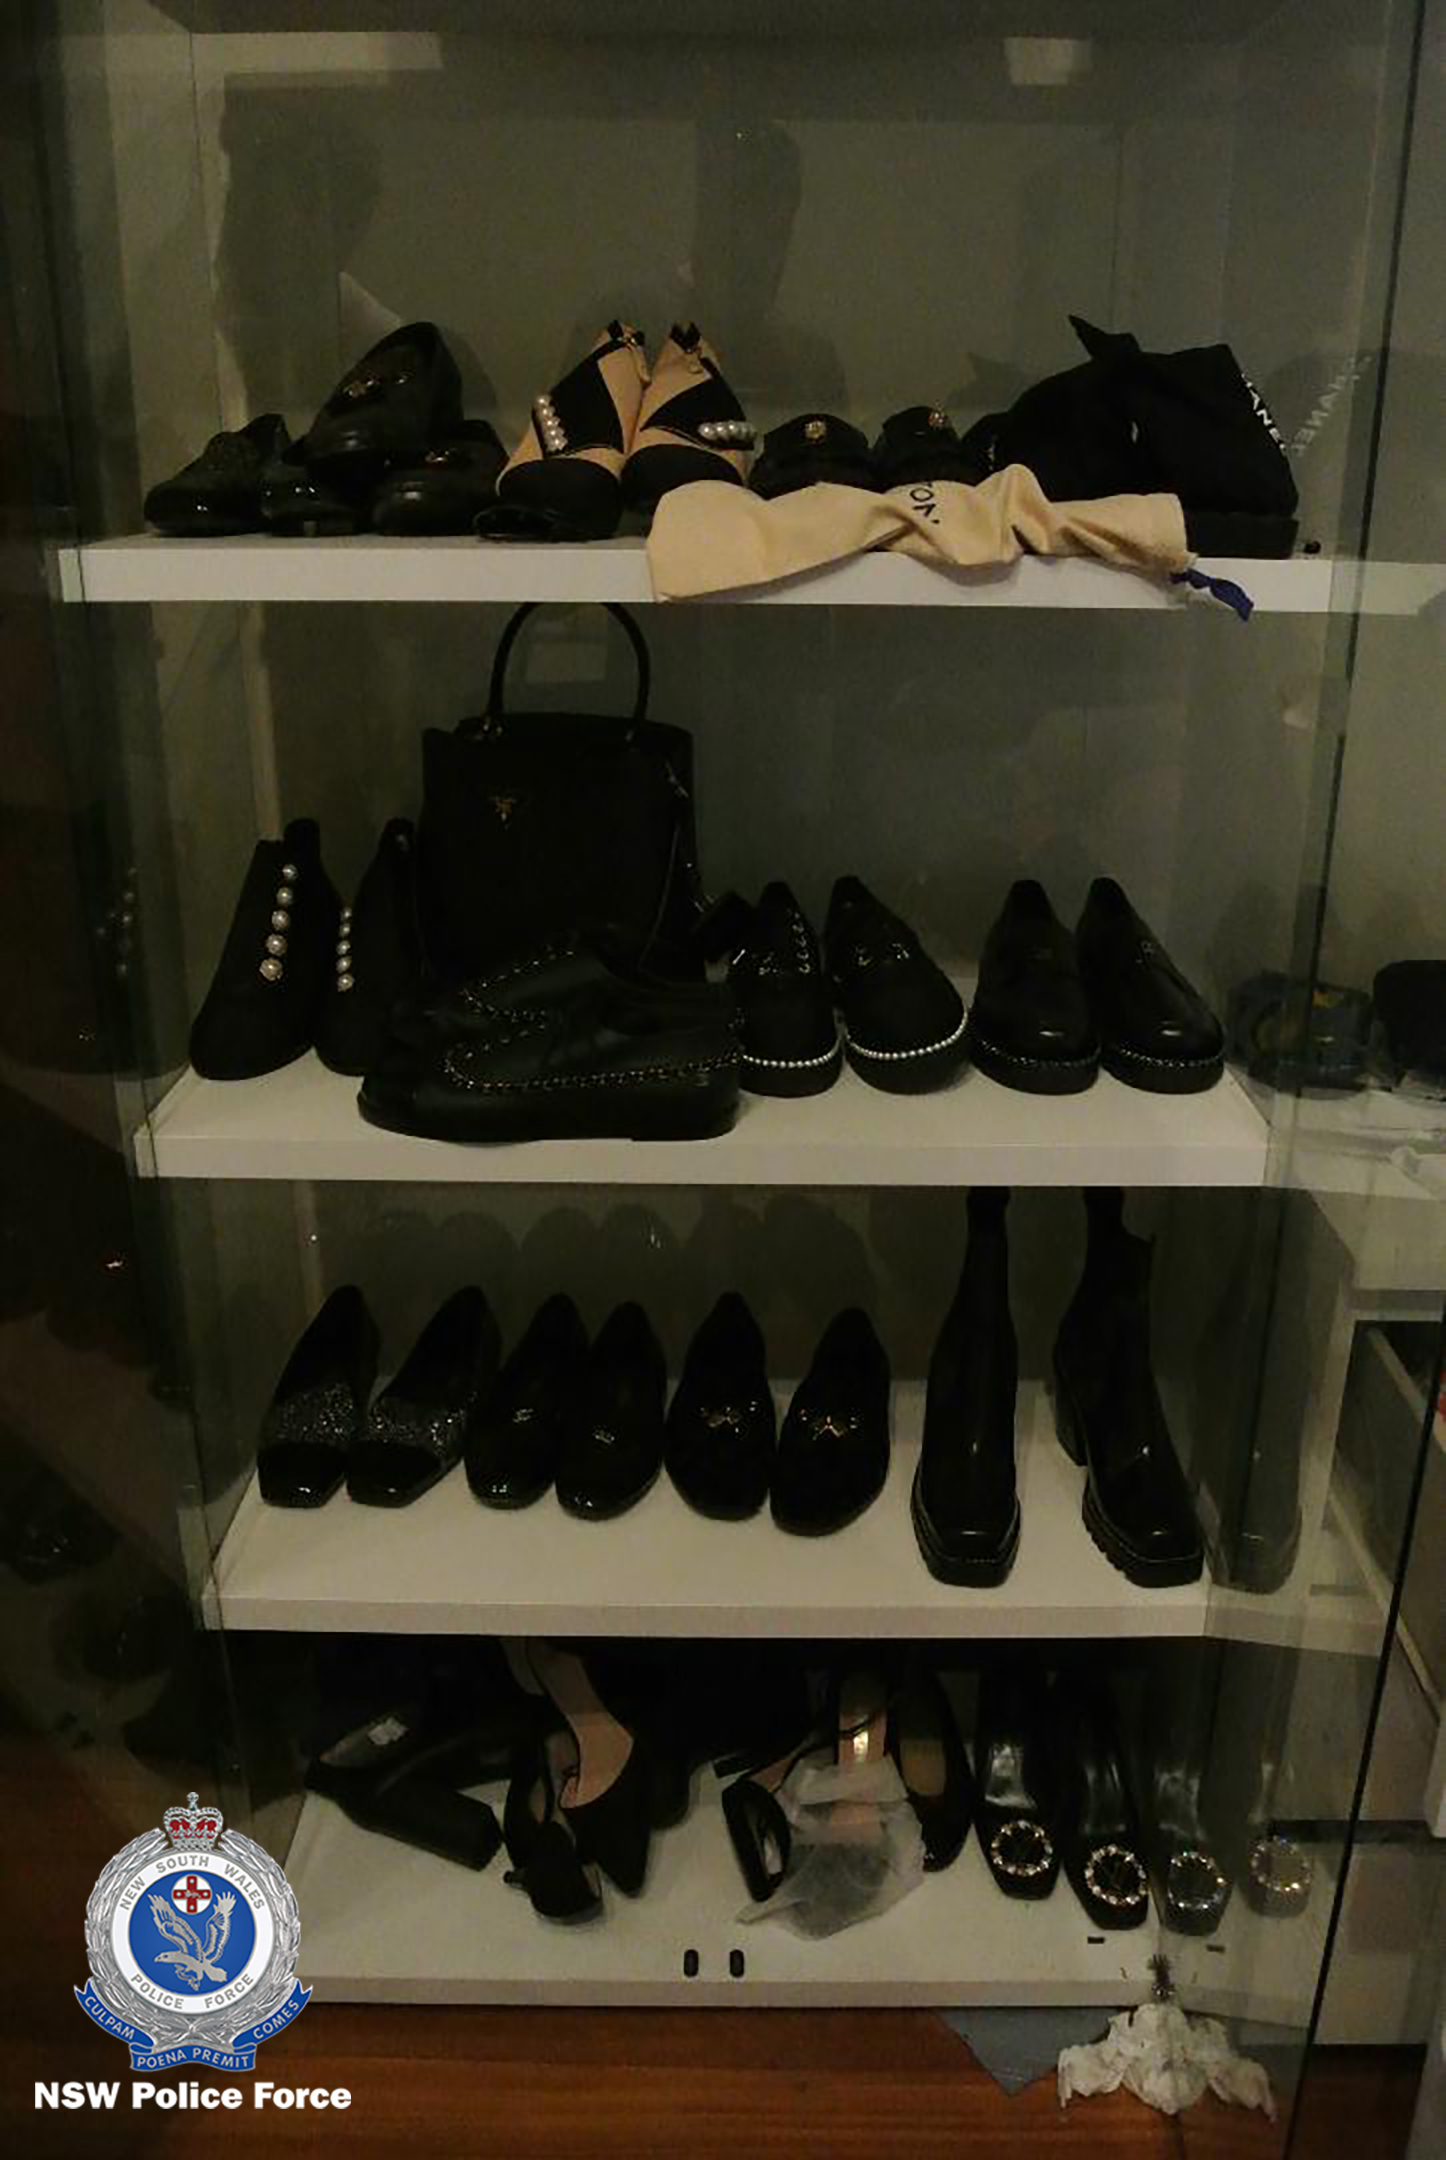 Officers seized 15 pairs of high-end women's shoes including brands such as Gucci and Louis Vuitton.